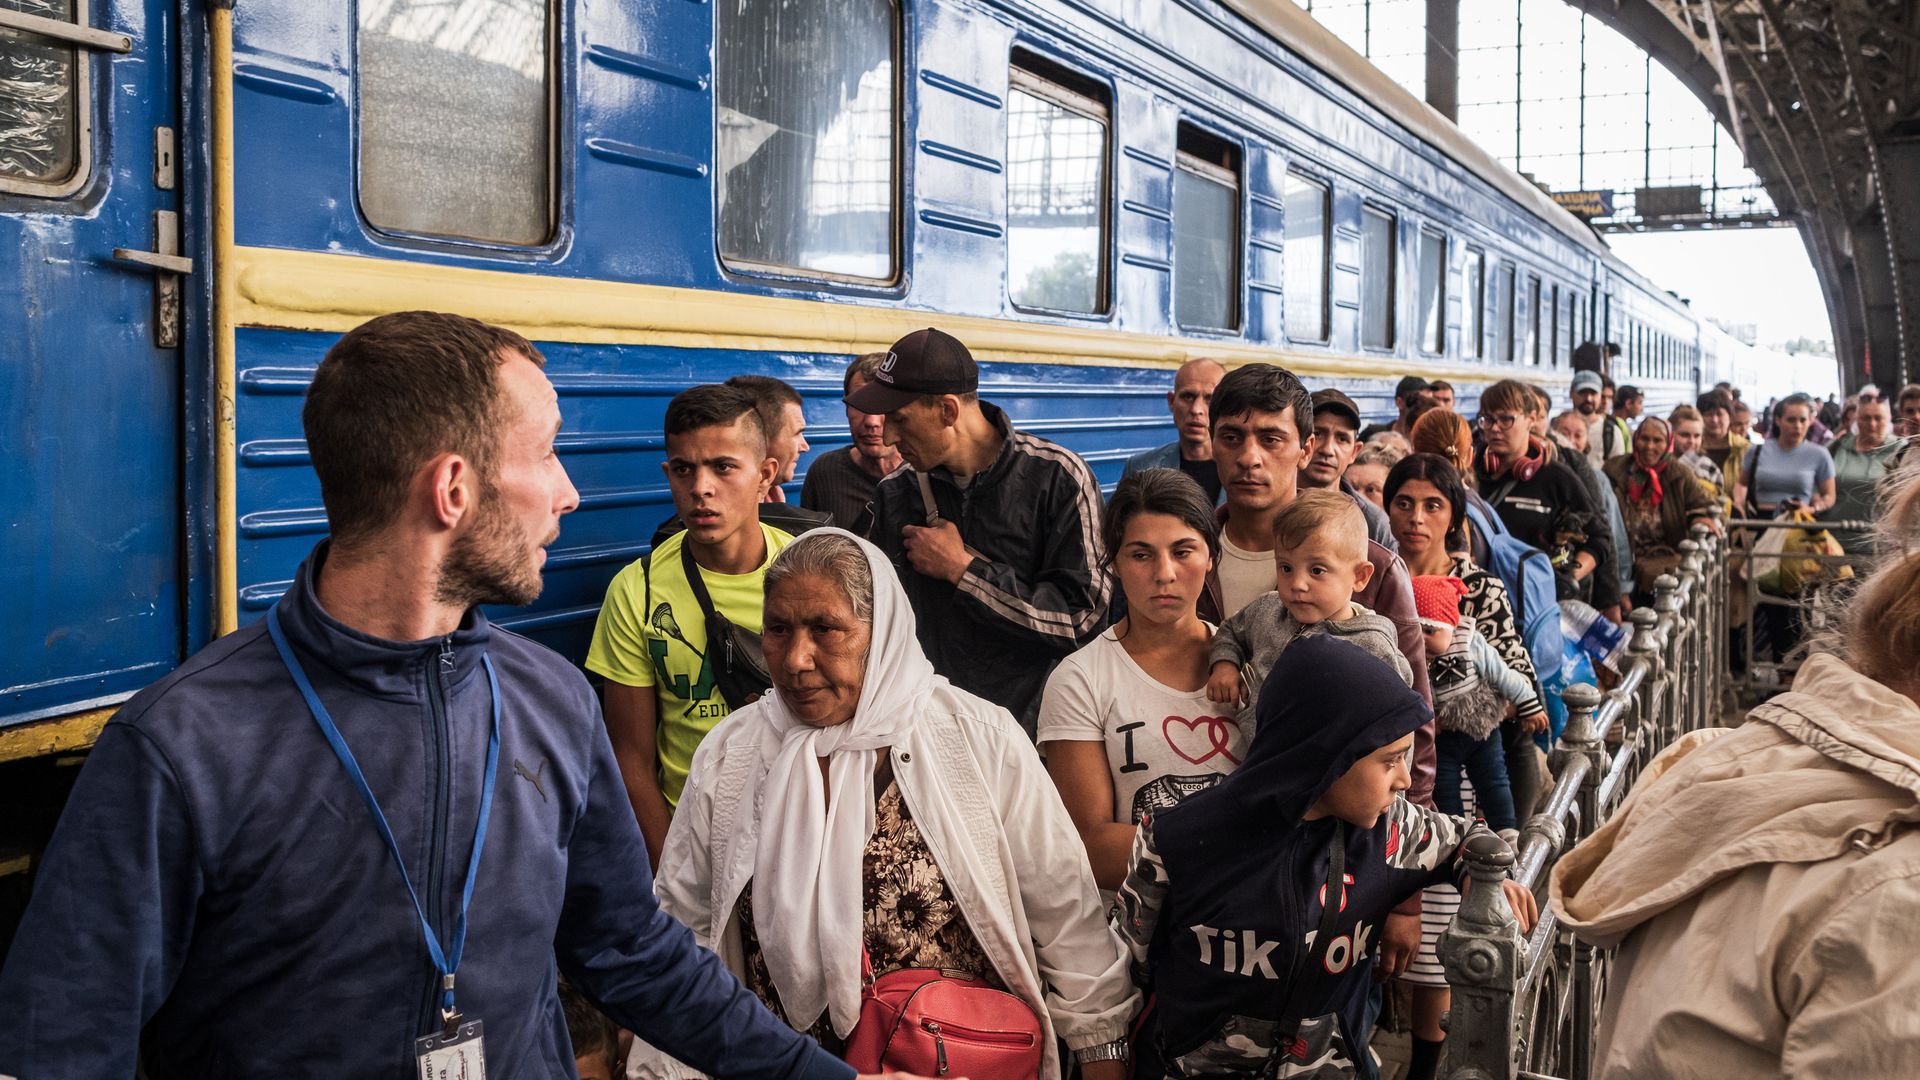 An evacuated train with people from the Donetsk region arrives at the railway station in Lviv, Ukraine on May 28, 2022.